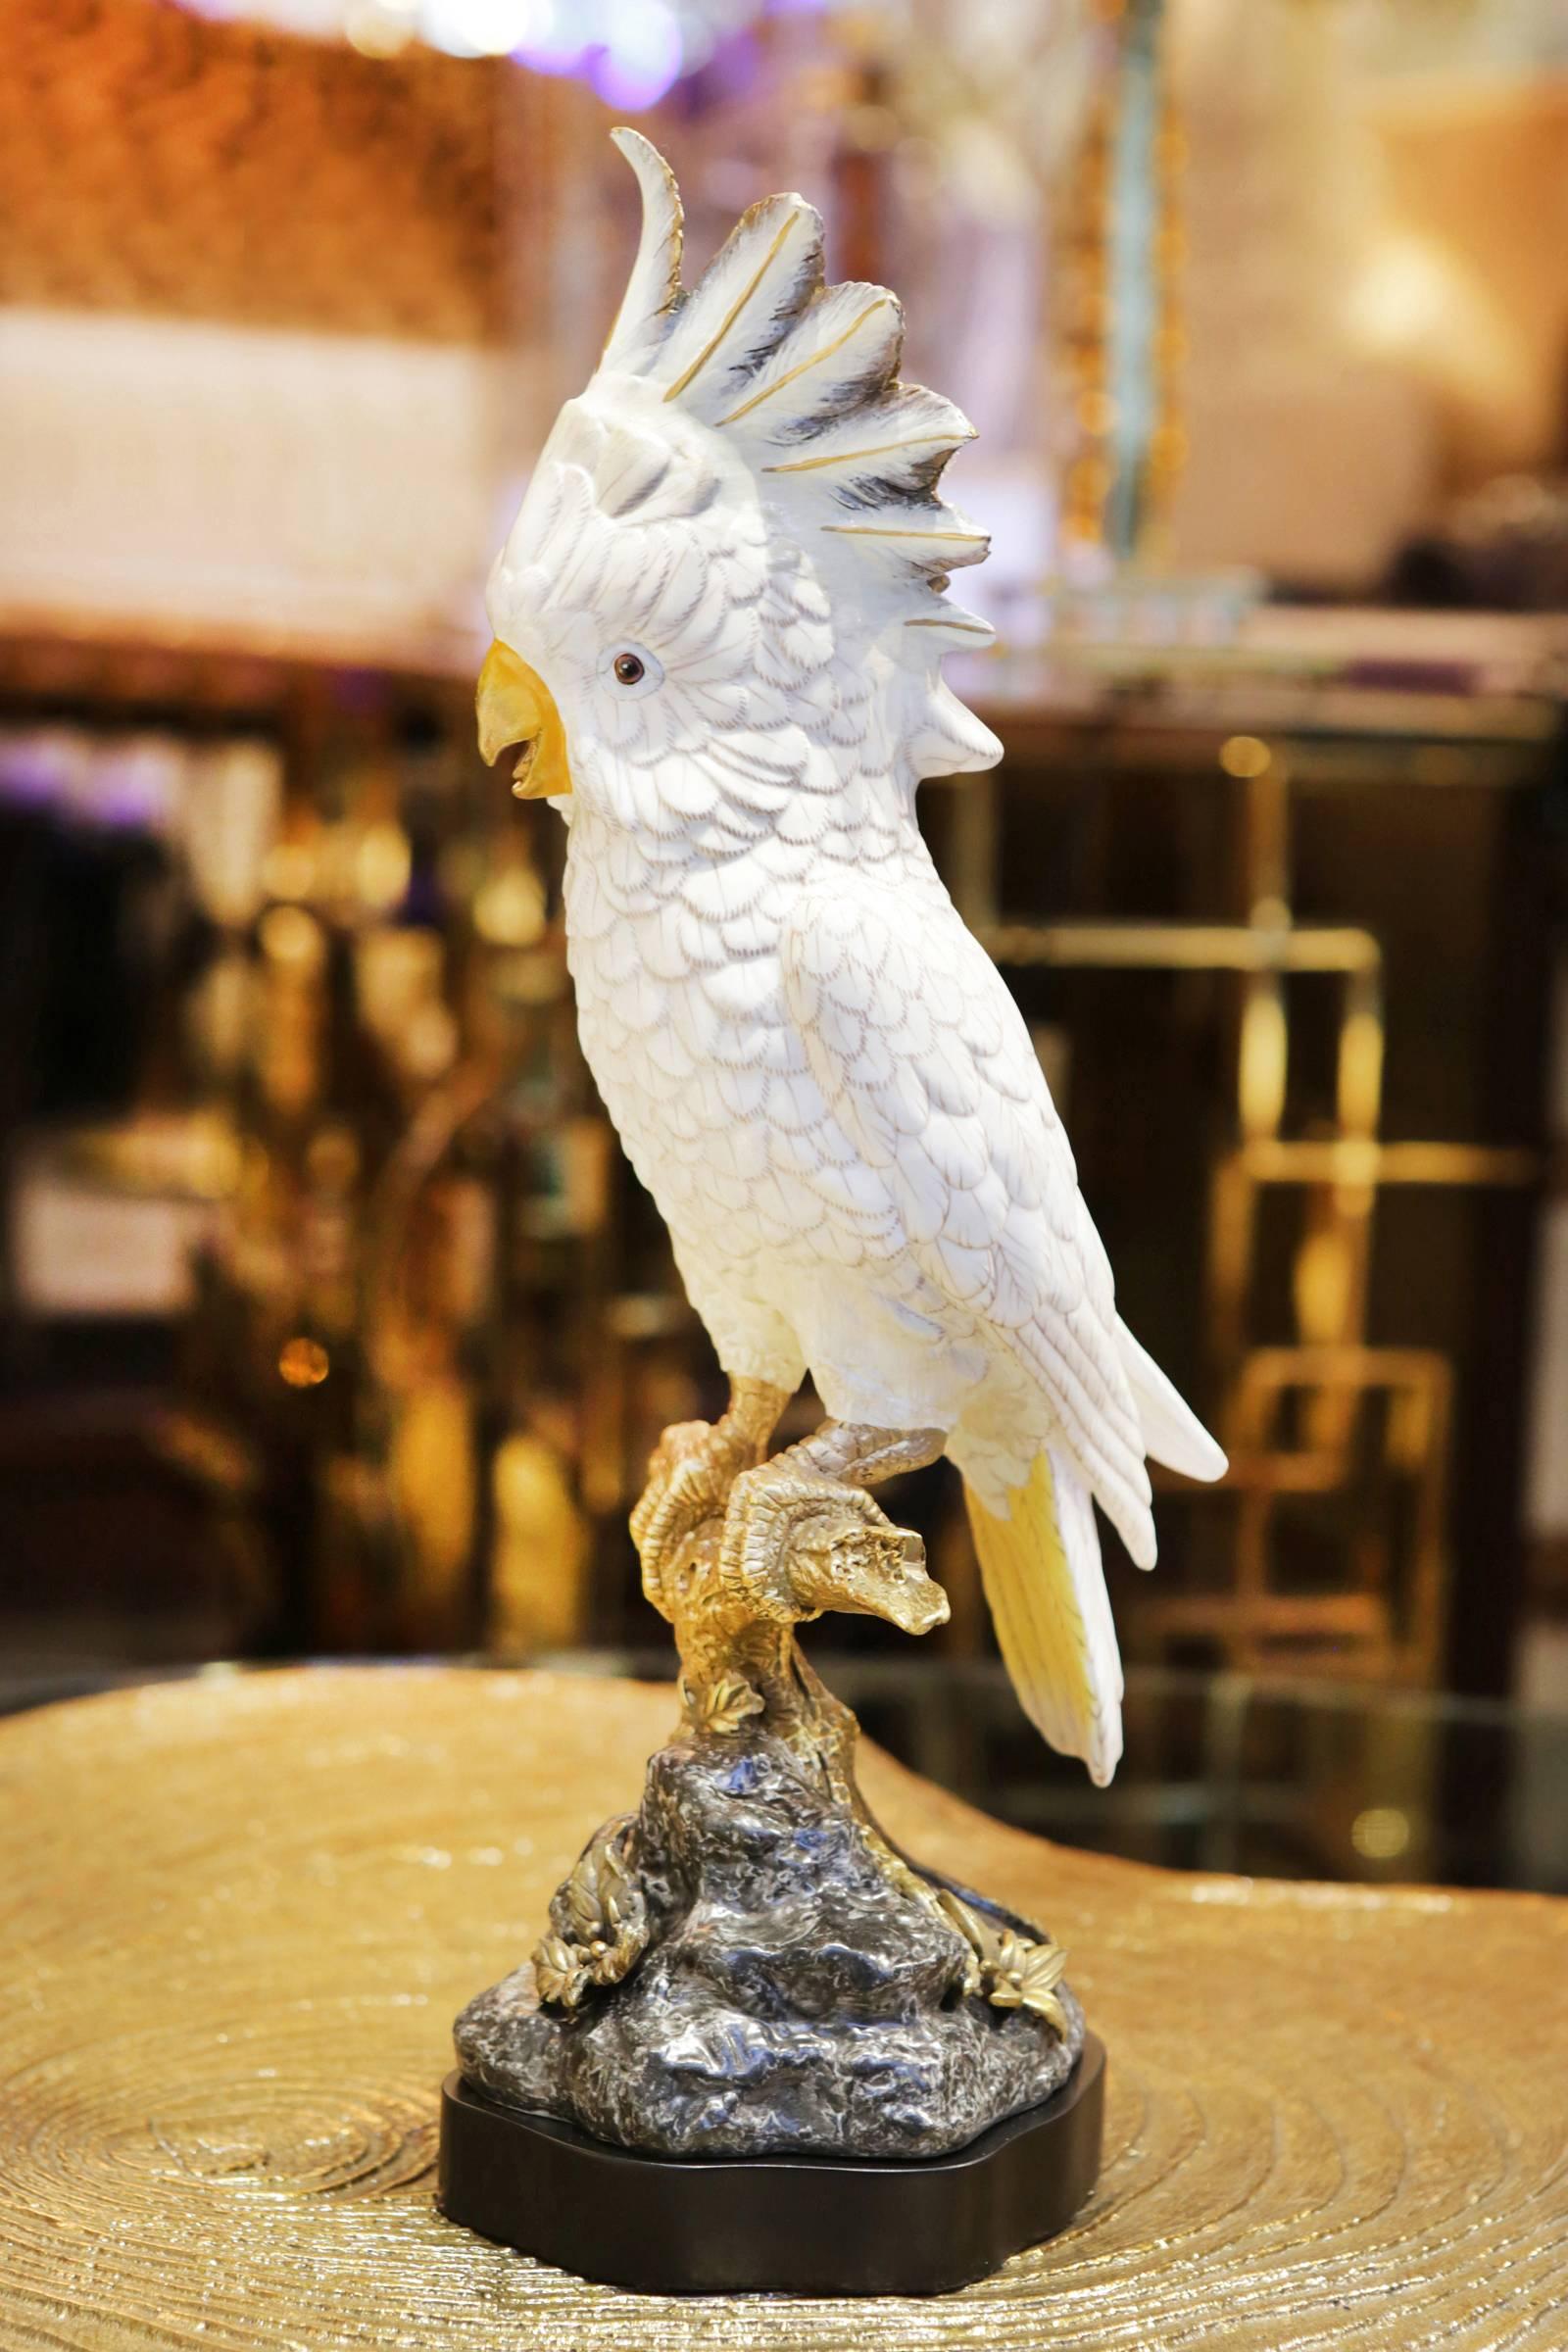 Sculpture white parrot all handcrafted in
porcelain. Hand-painted and with details
in solid bronze.
 